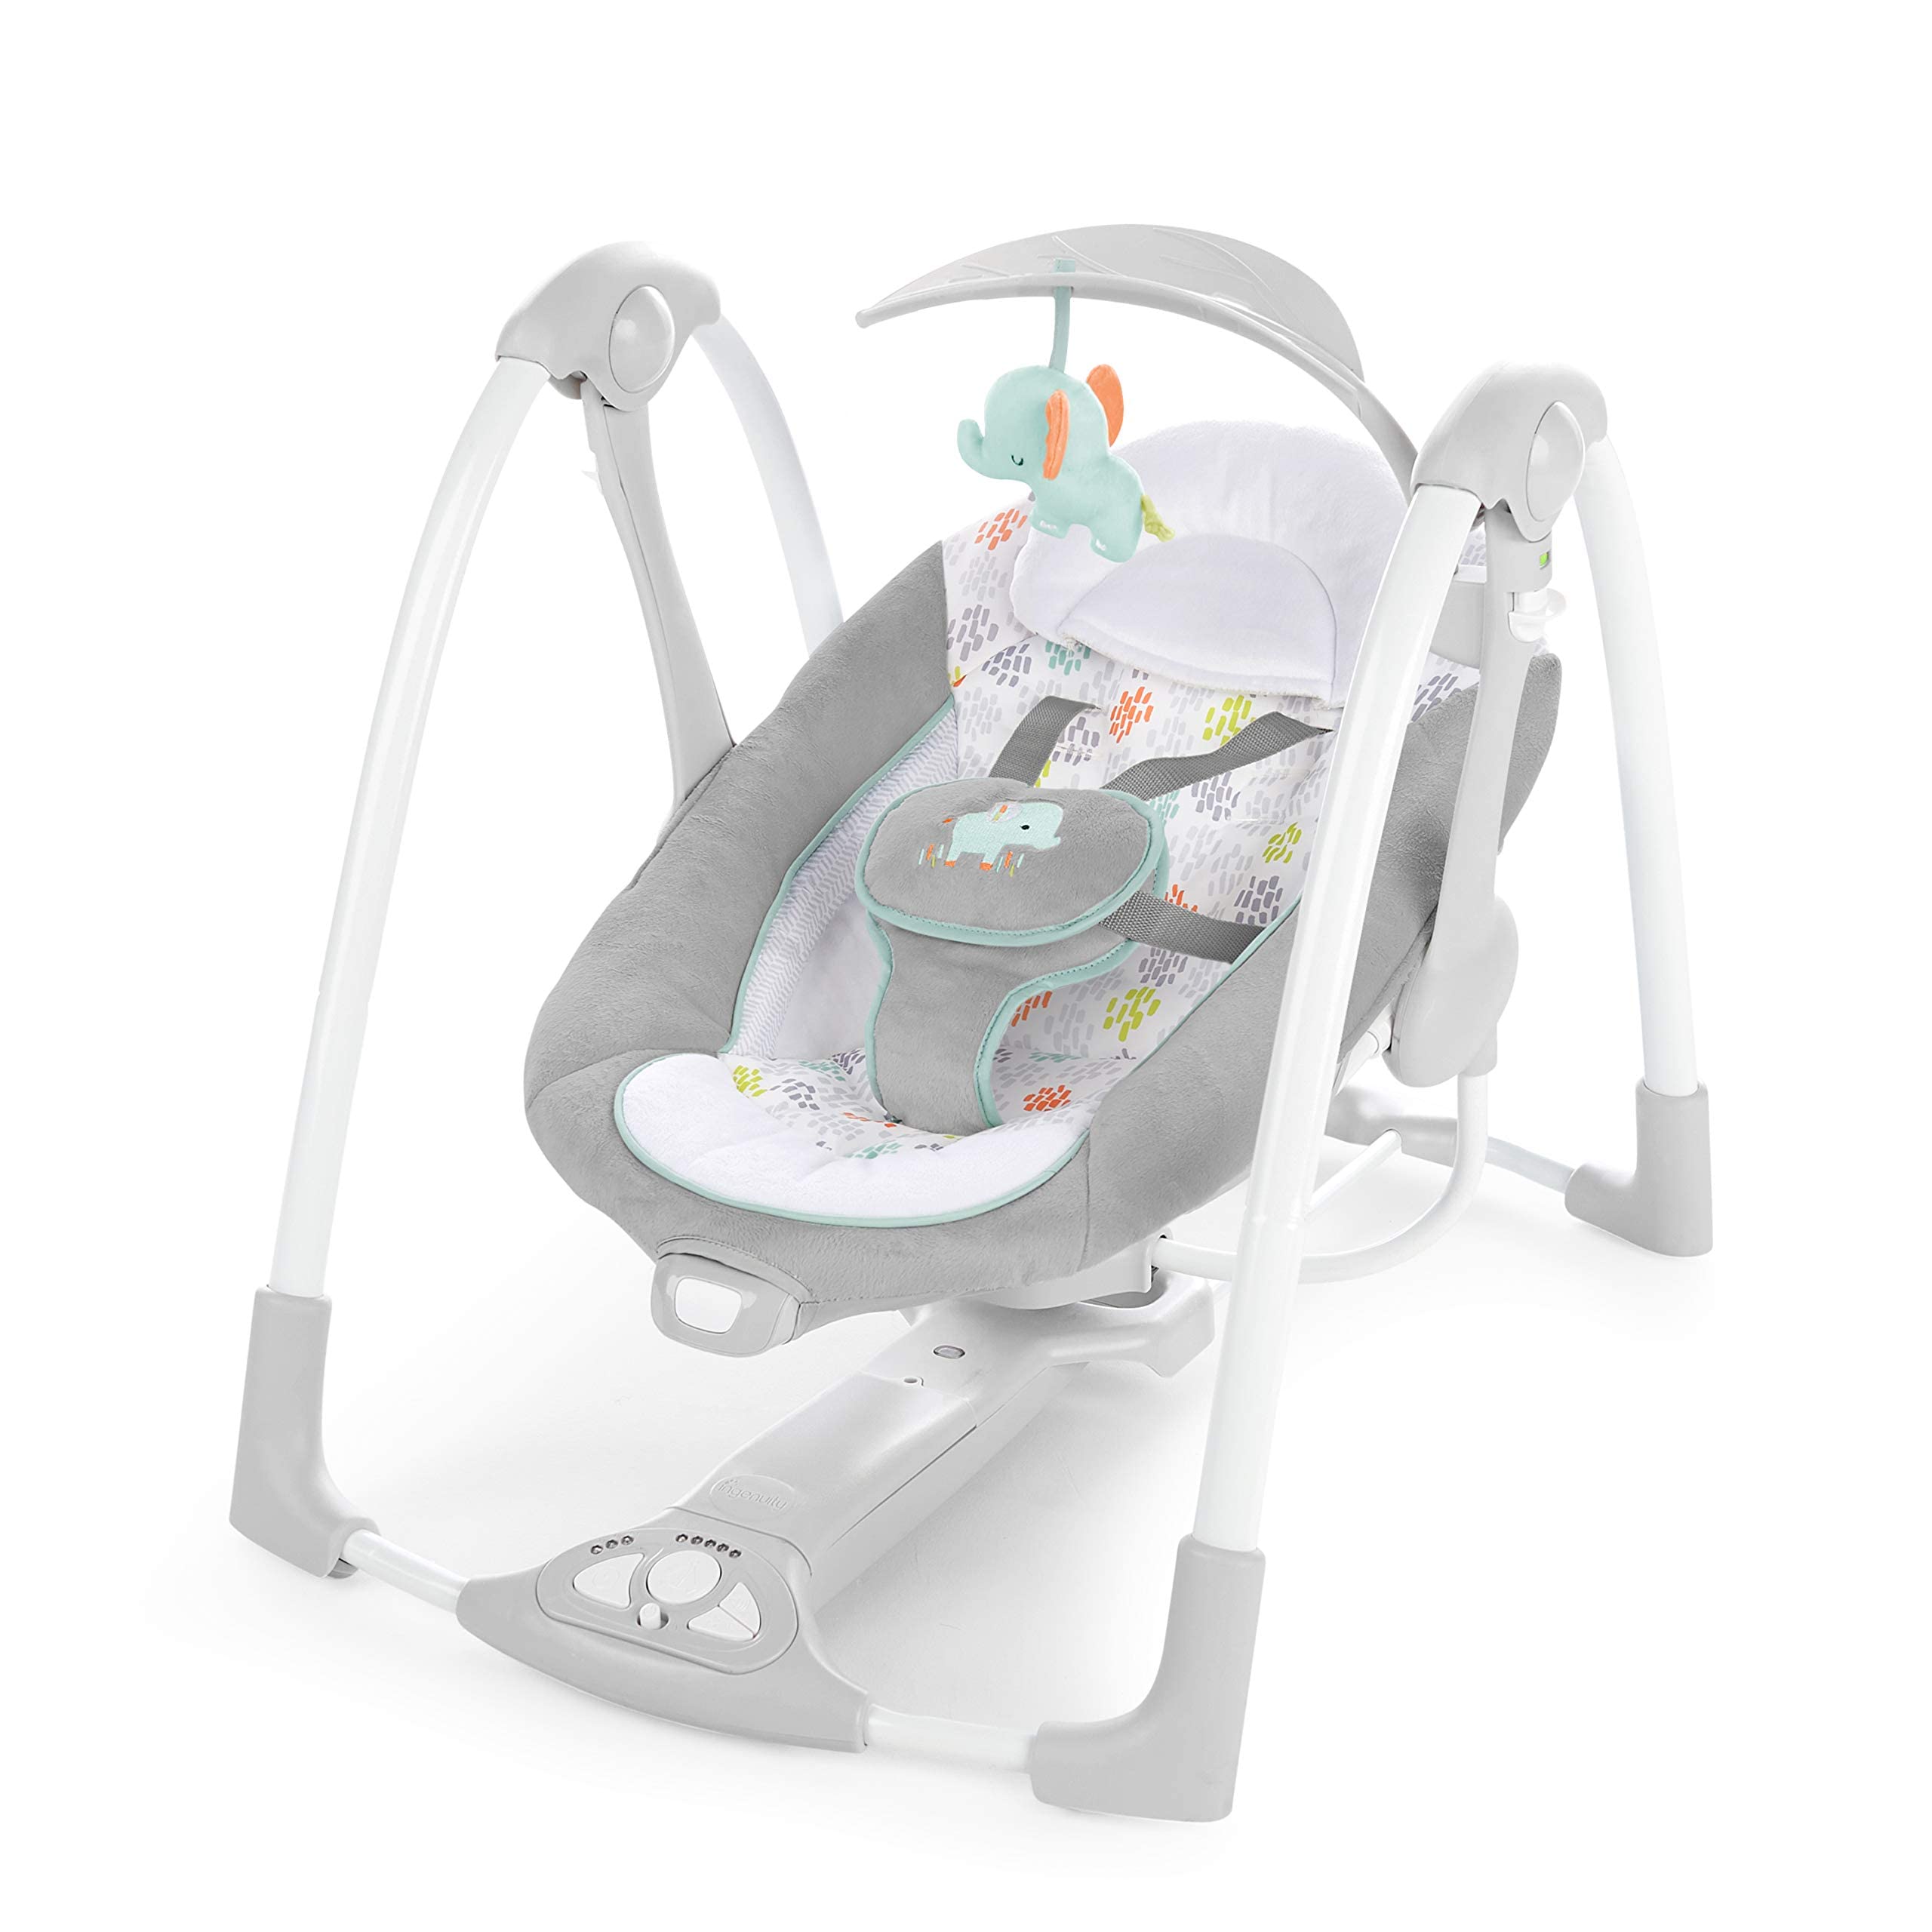 Ingenuity convertMe 2-in-1 compact Portable Automatic Baby Swing & Infant Seat, Battery-Saving Vibrations, Nature Sounds, 0-9 Mo